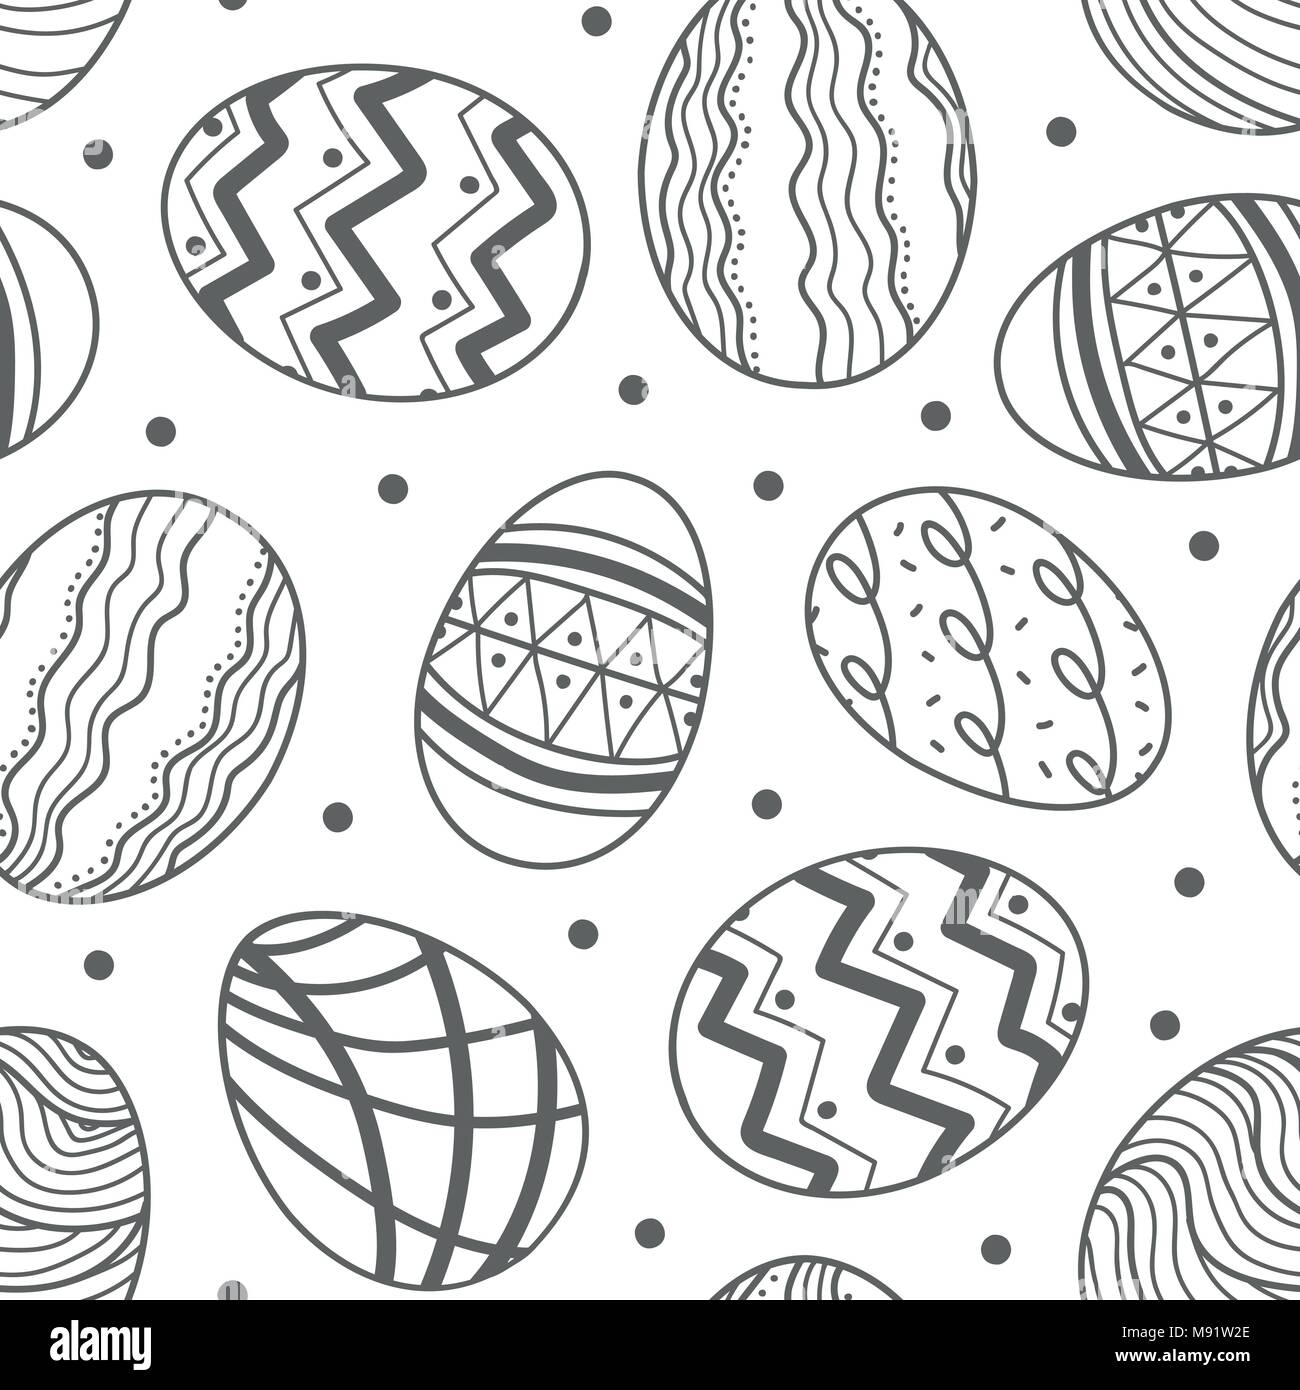 Easter eggs in gray outline and dots random on white background. Cute hand drawn seamless pattern design for Easter festival in vector illustration. Stock Vector